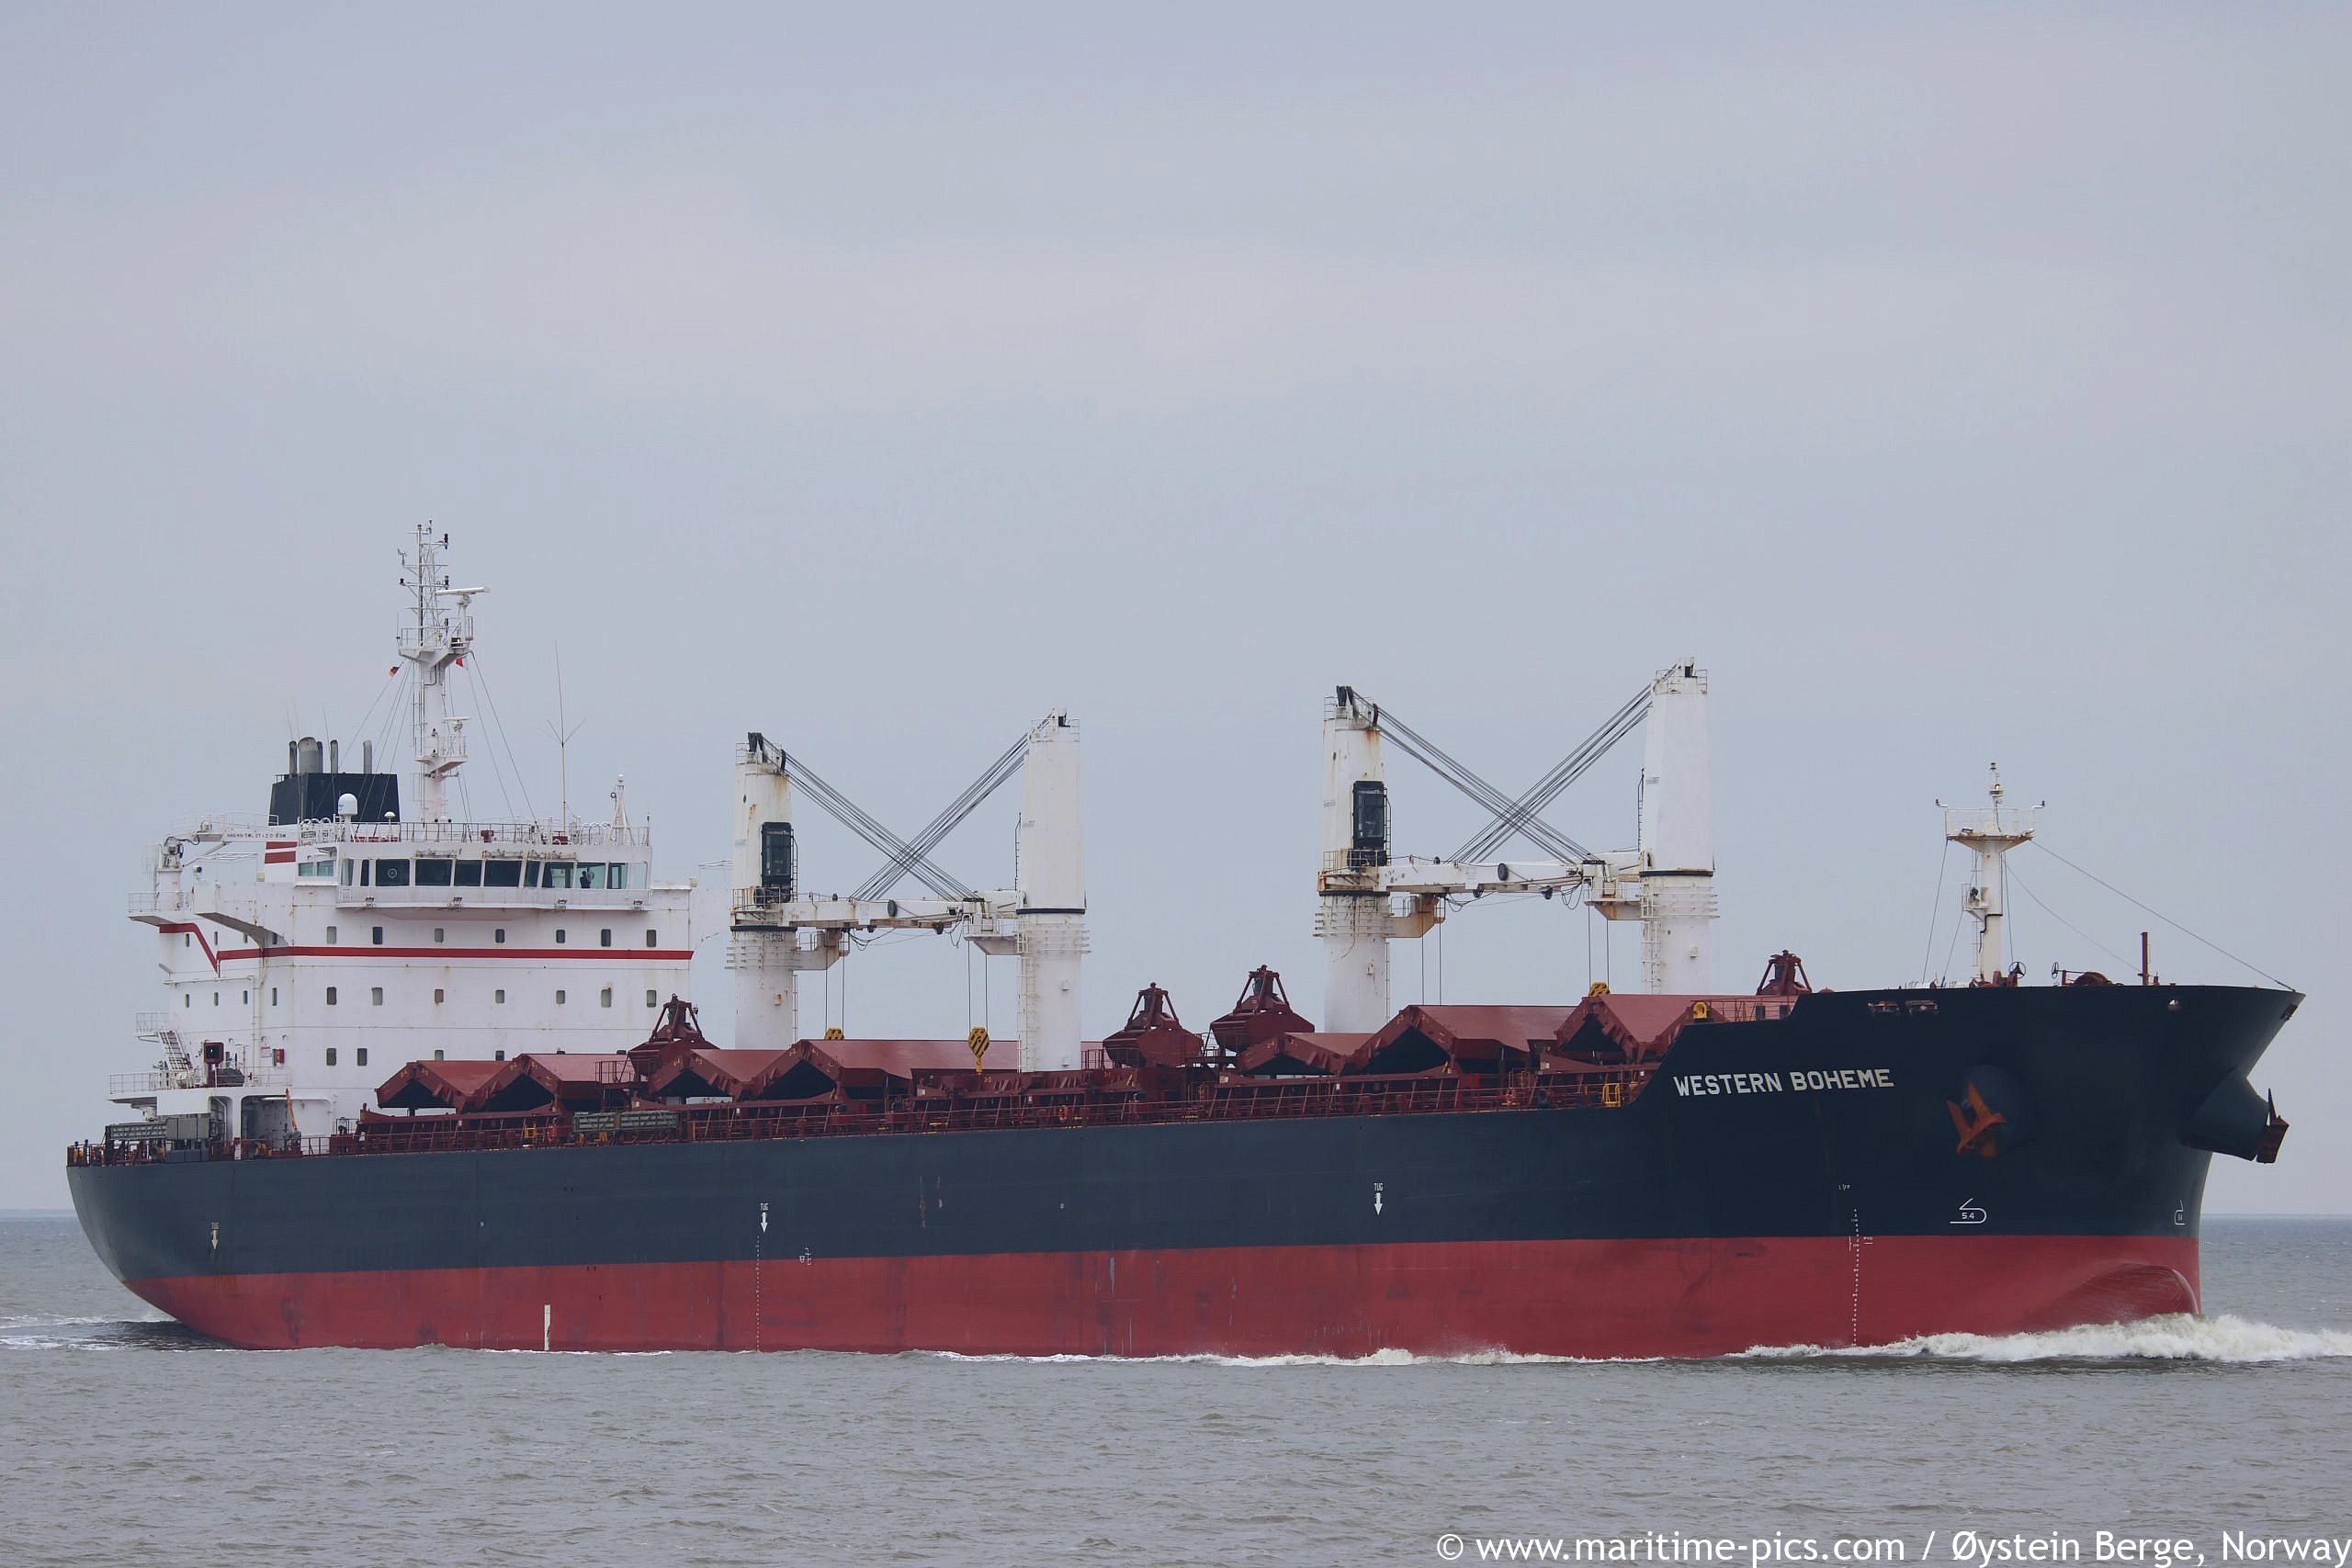 WESTERN BOHEME” PASSING CUXHAVEN, 7 MAY 2023, ON HER WAY FROM MONTOIR TO  SWINOUJSCIE – Maritime-Pics